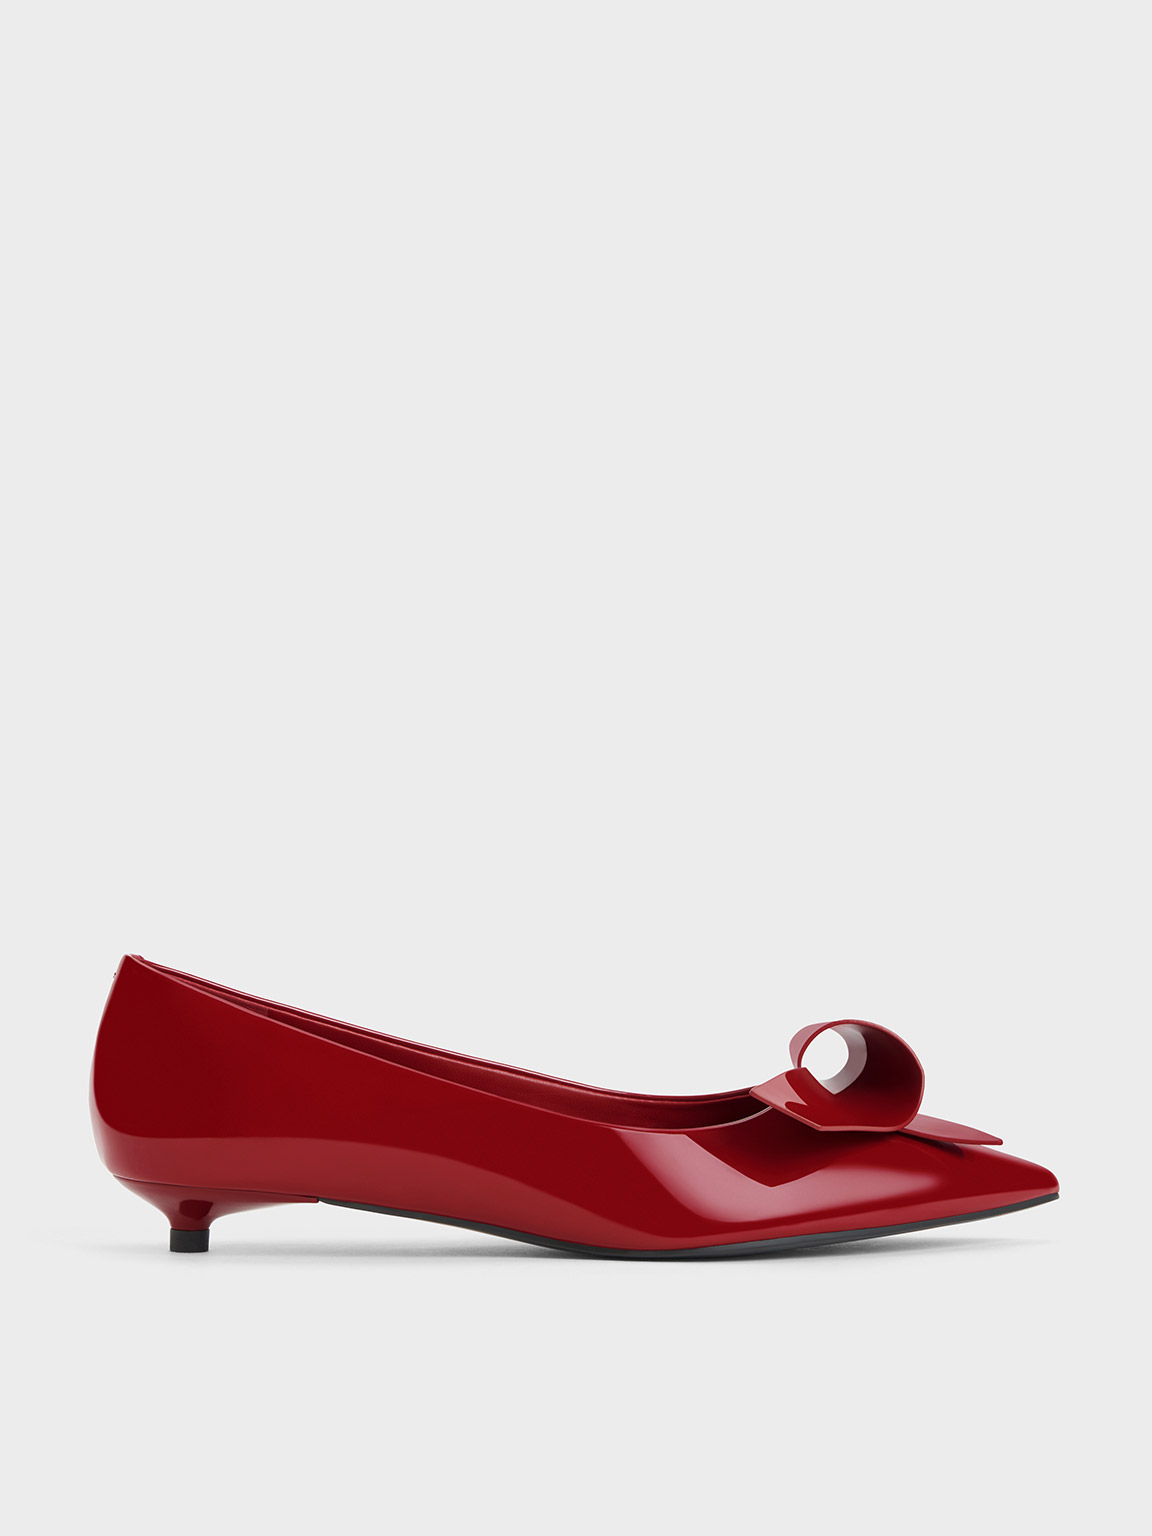 Sculptural Knot Pointed-Toe Flats